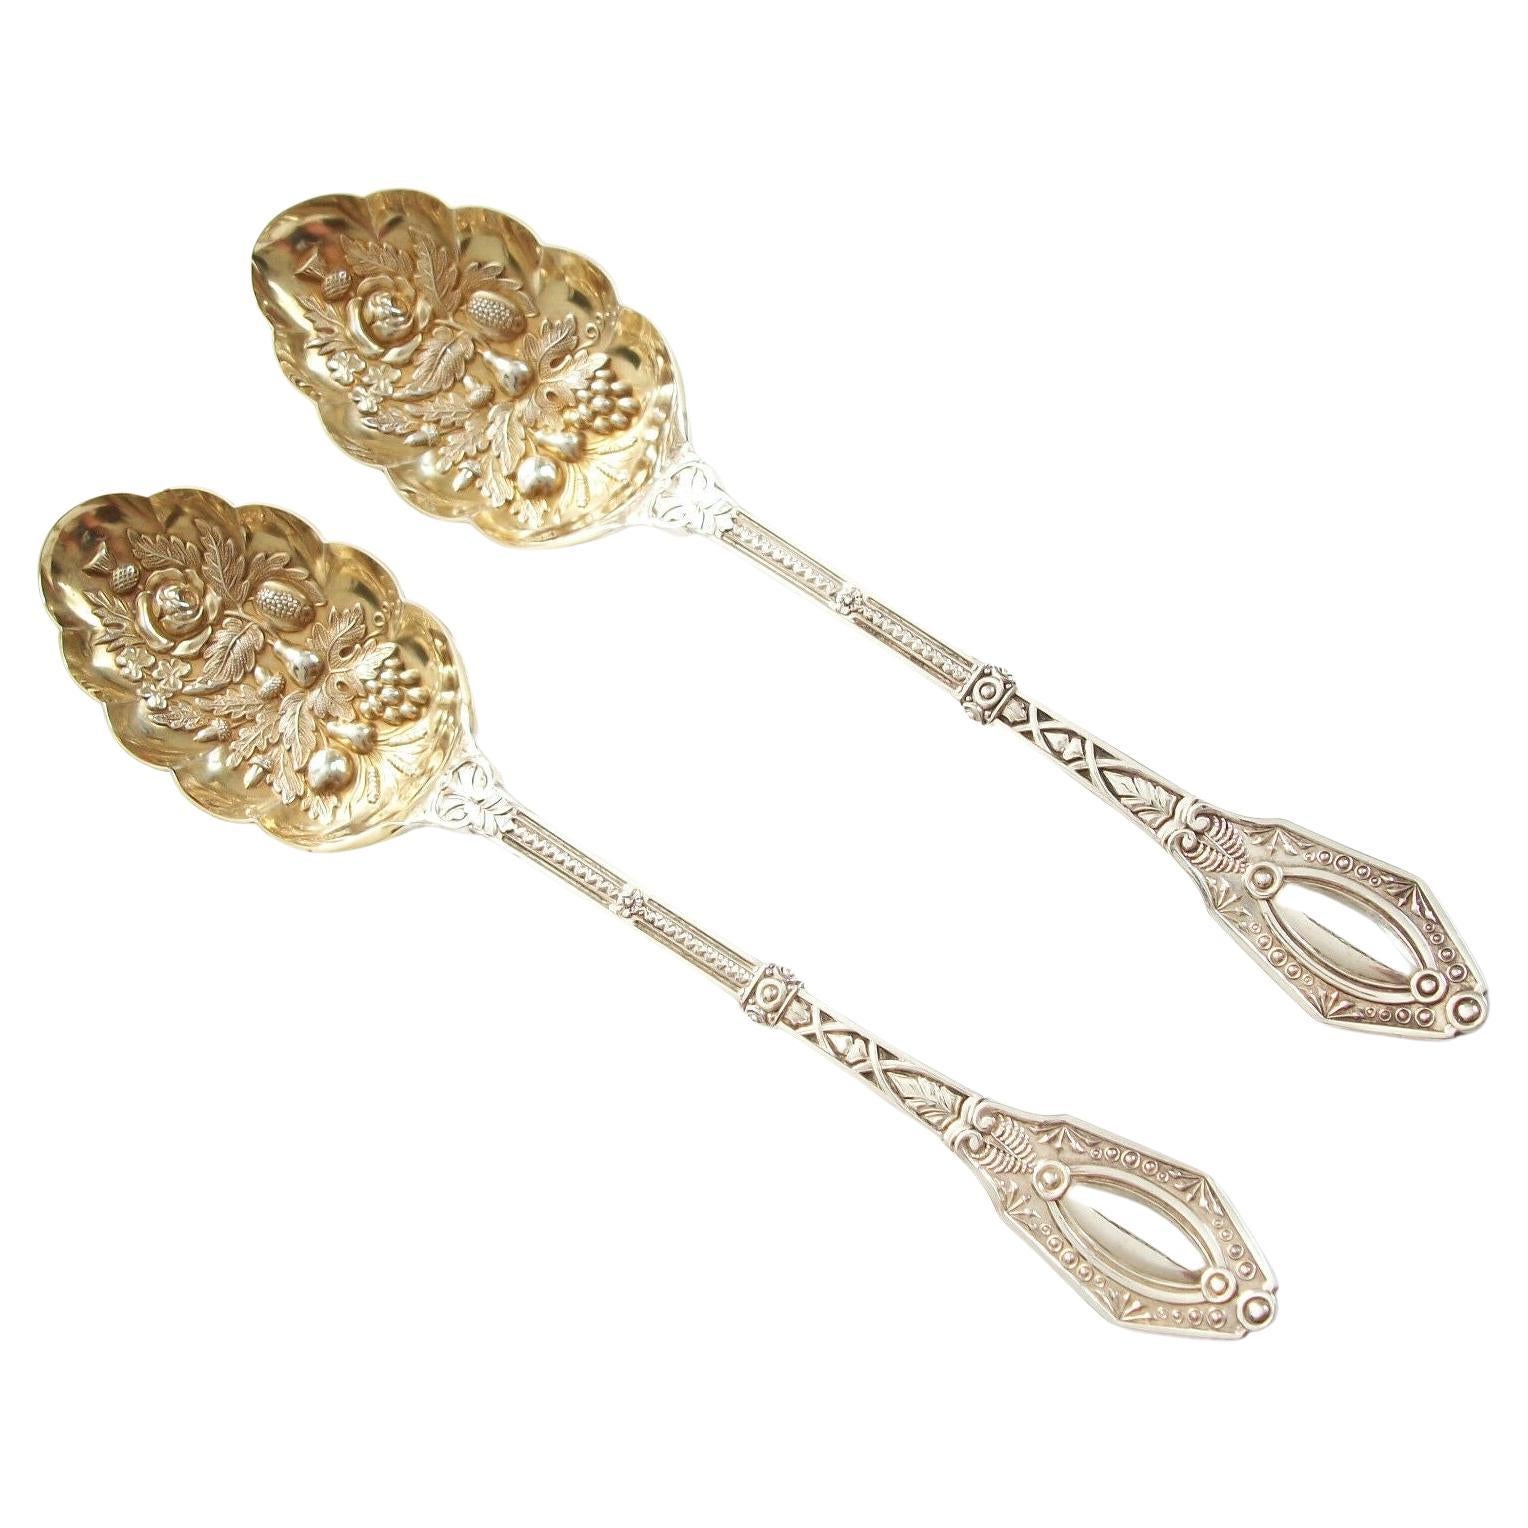 Victorian Silver Plate Berry Serving Spoons, Leather Case, U.K., 1878